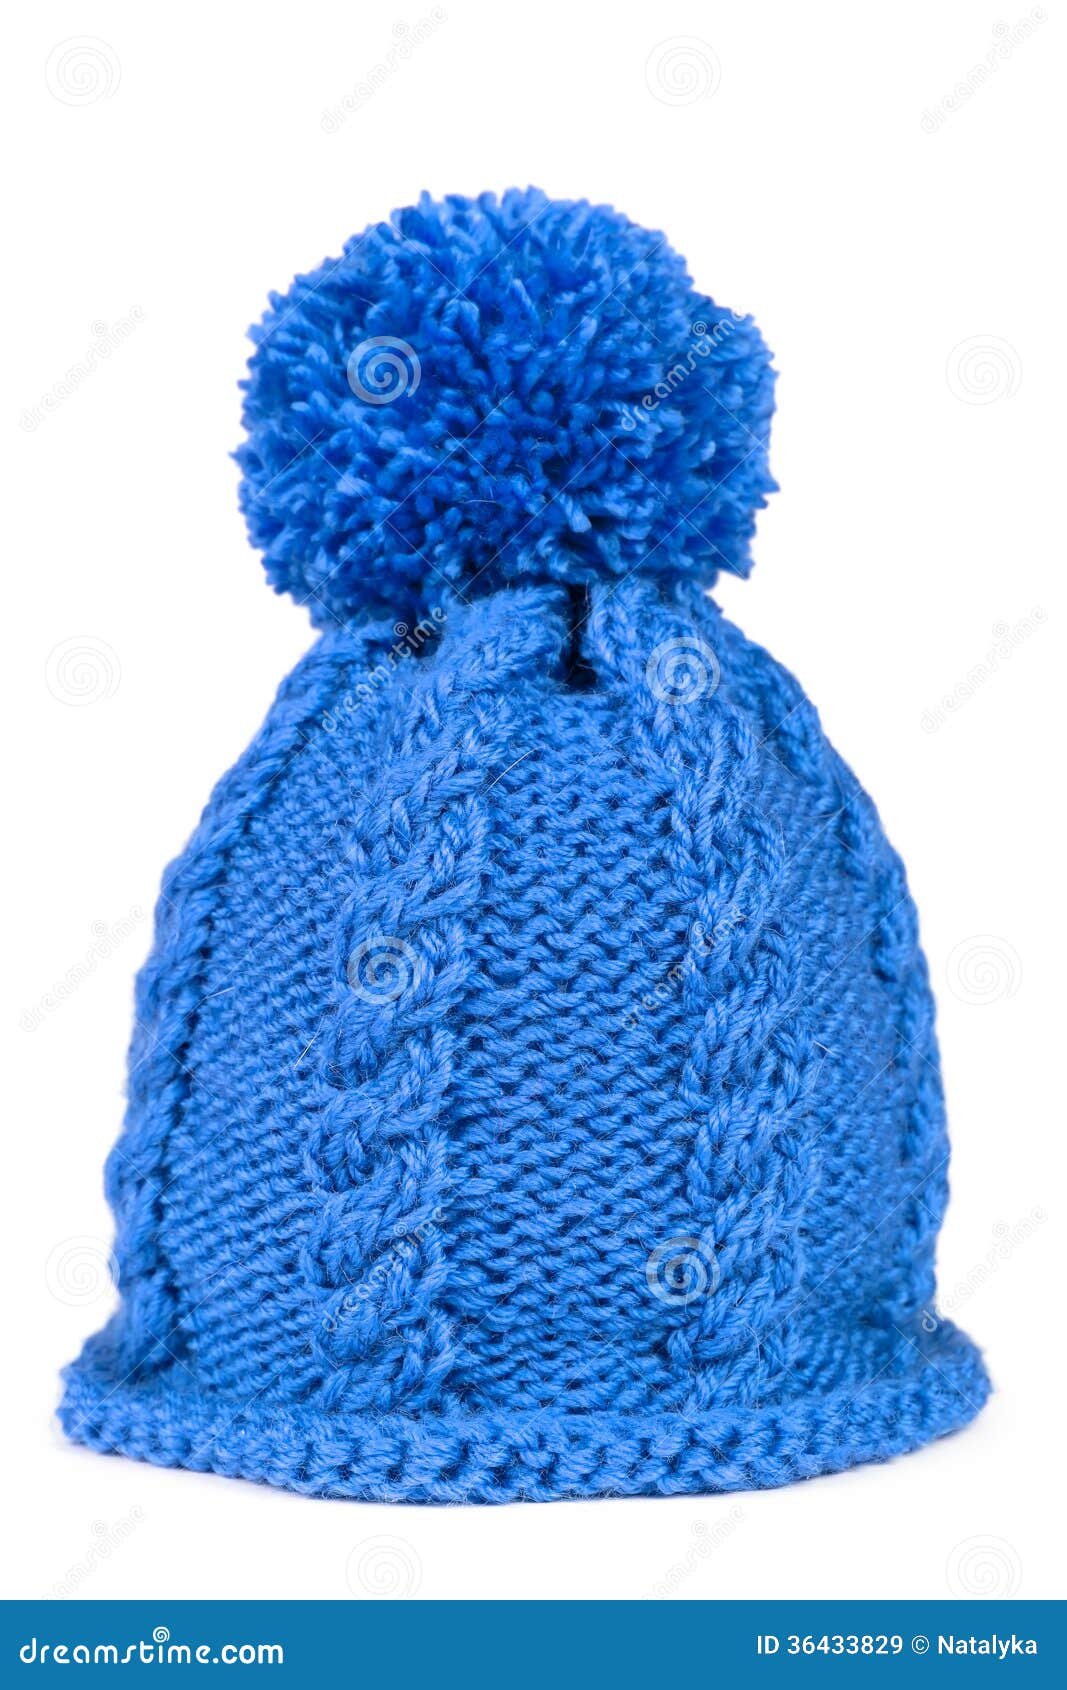 Knitted Hat With A Pompon Royalty Free Stock Images - Image: 36433829